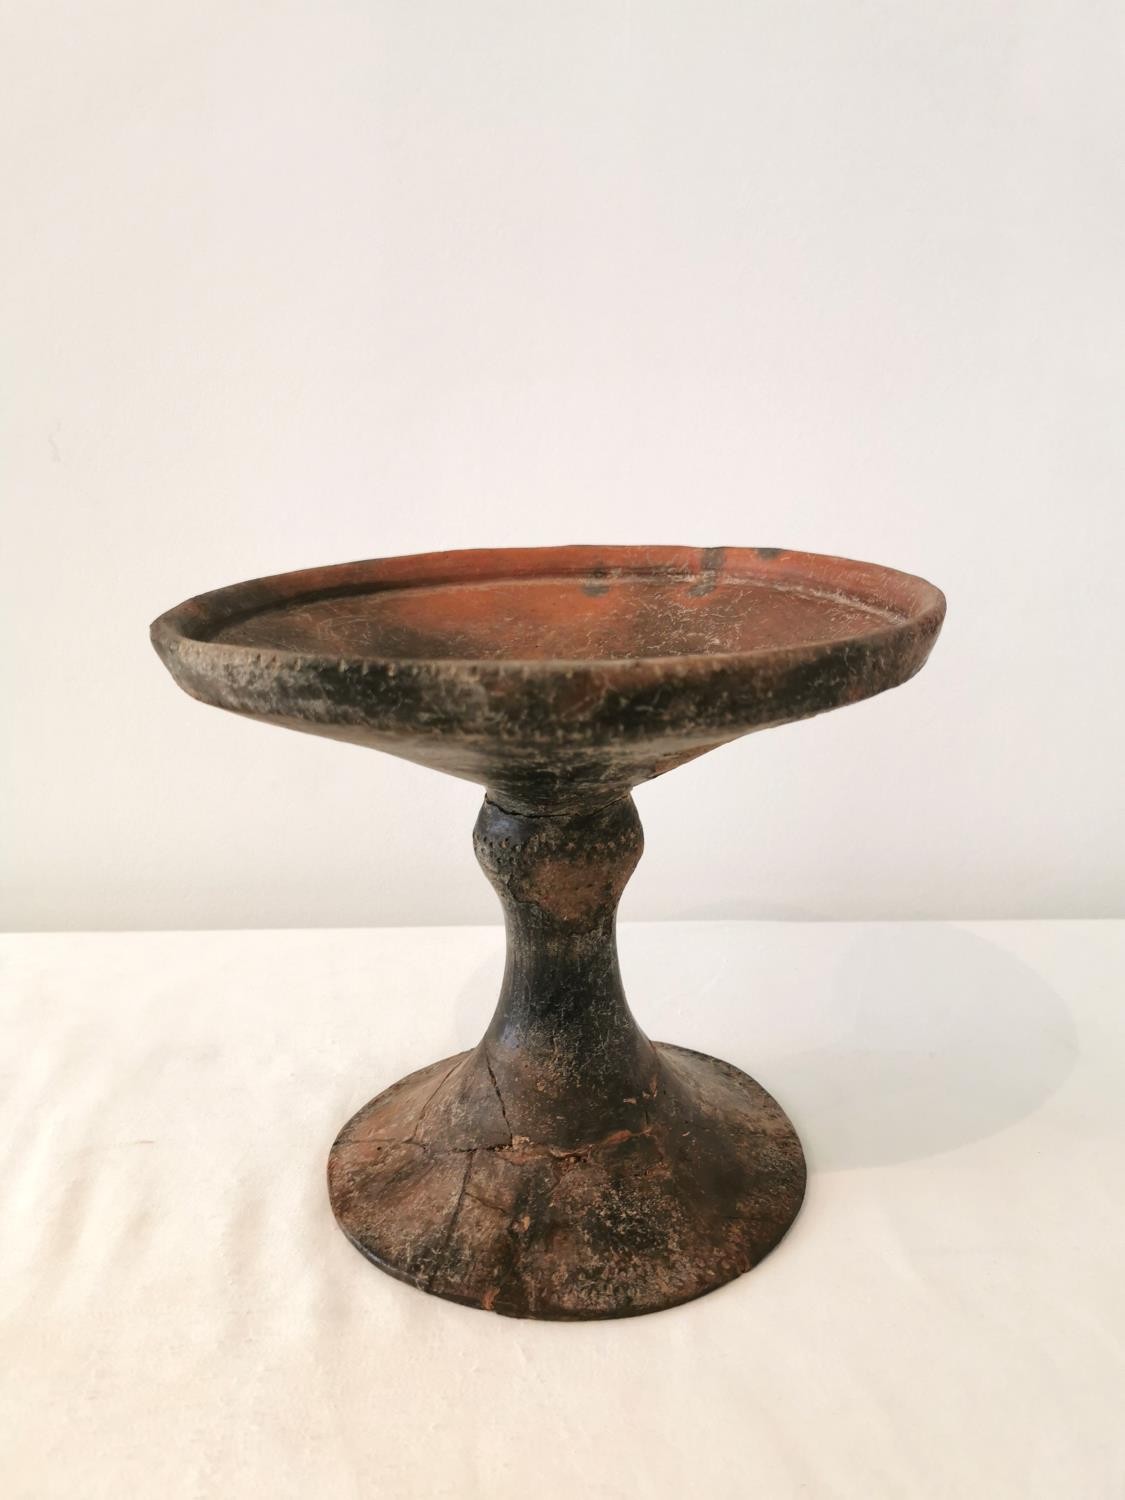 A Pre-Colombian terracotta pedestal dish, with carved and grooved decoration at rim. ( base and